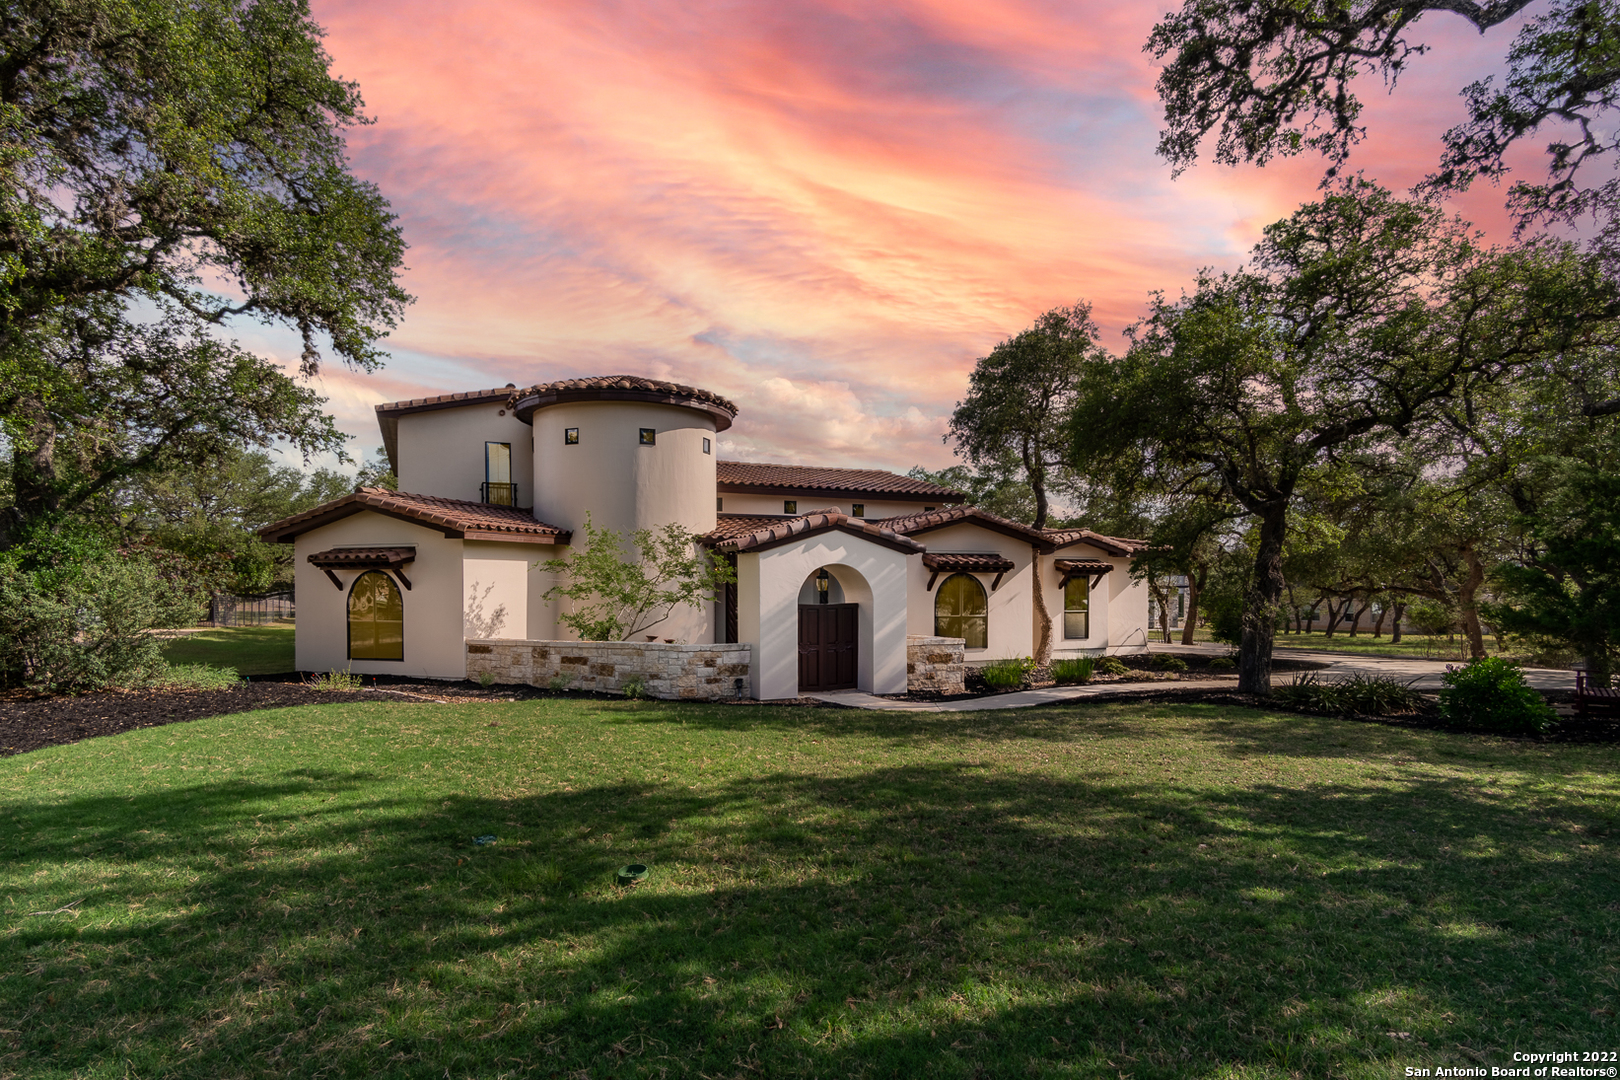 ***OPEN HOUSE:  June 4, 11 am - 1 pm***. Gorgeous one of a kind Spanish Mediterranean inspired home in the quiet gated community of Glenwood located in Bulverde.  Situated among dozens of oak trees on an acre is this beautifully landscaped 4 bedroom, 3.5 bath home complete with two private courtyards and unique features you won't find anywhere else!  Enter the private gate on the front courtyard and you'll notice a unique fountain the homeowners found in Mexico.  Pass by the columns through the custom hand carved rounded front door (imported from Guananato Mexico) and into the rotunda style entry way where you will find a beautiful sweeping staircase lined with Spanish - Mediterranean tile.  From there you'll enter the main living area of the home where the high ceilings are adorned with beautiful beams and custom designed Chandaliers from Italy.  The kitchen is complete with a large island, granite counters, a breakfast nook and gorgeous custom cabinetry.  Curl up next to the stunning floor to ceiling fireplace in the winter while enjoying the view to your very private backyard courtyard with an outdoor kitchen and entertaining space.  This beautiful home is a must see!